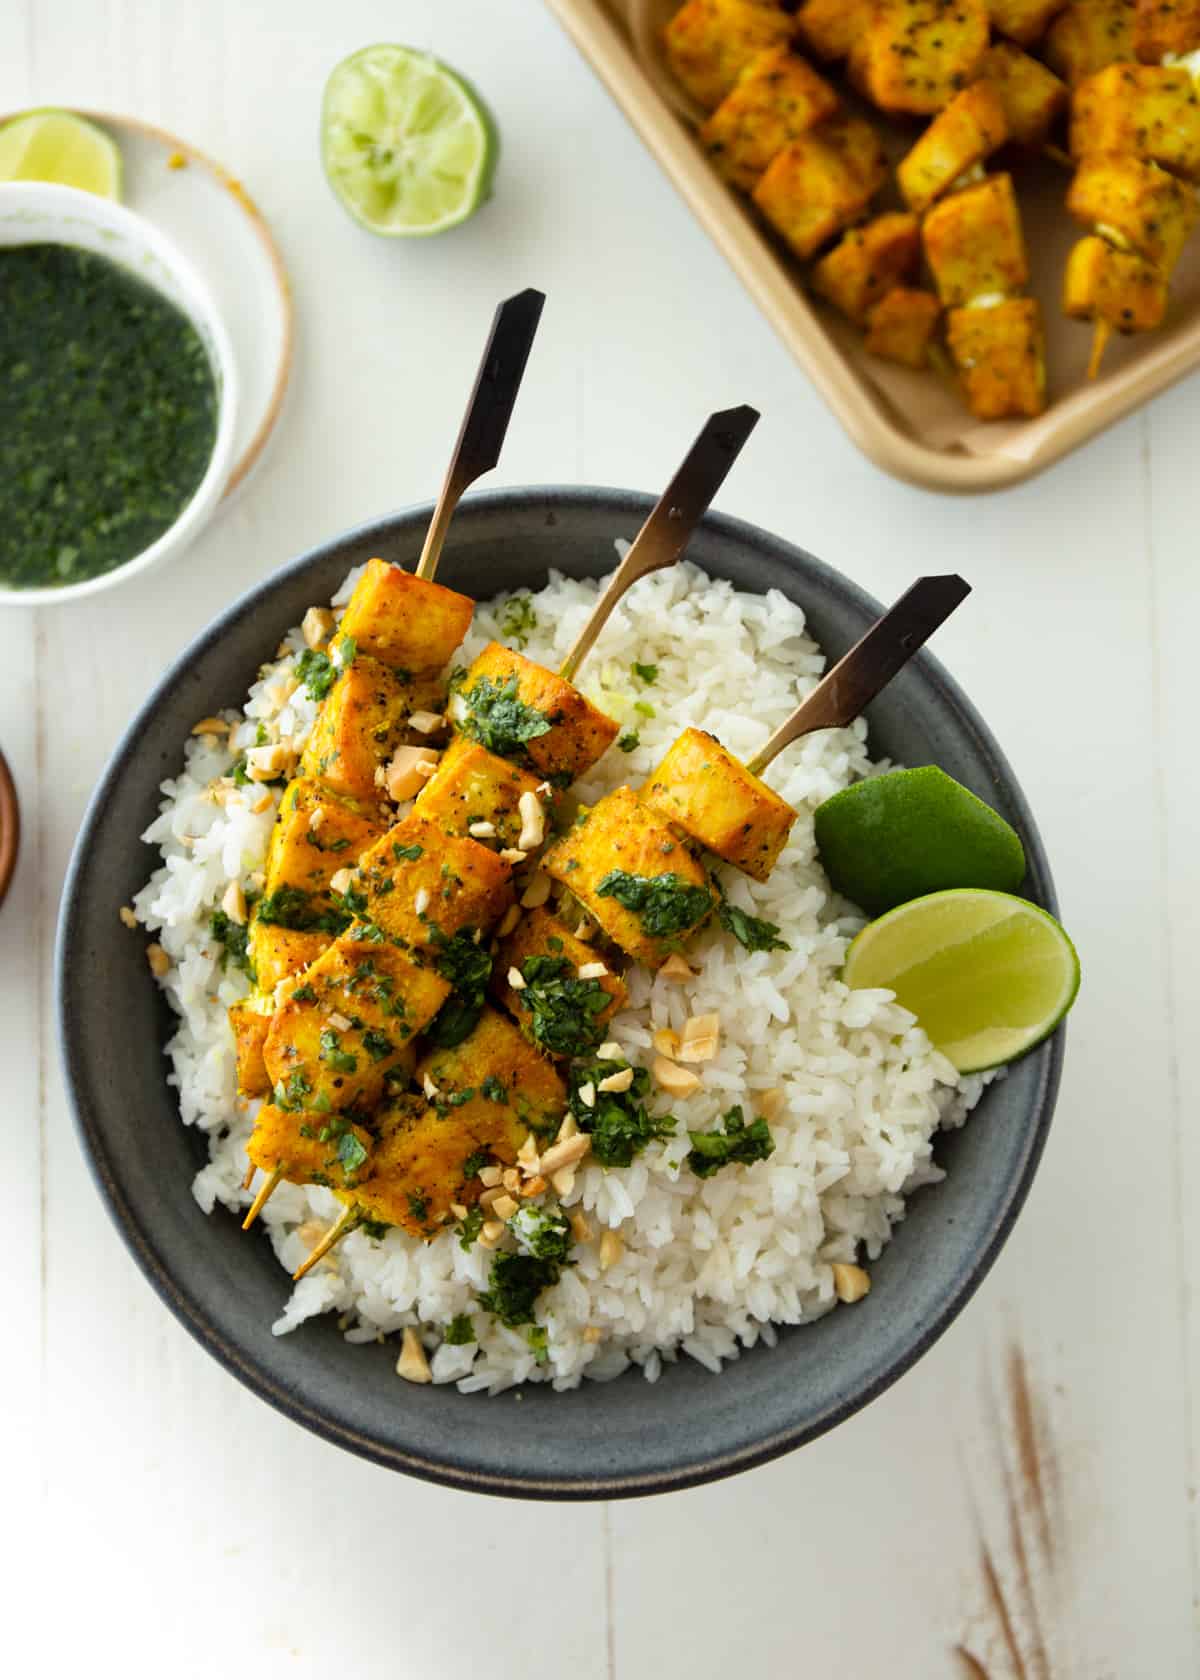 fish skewers over rice in a black bowl